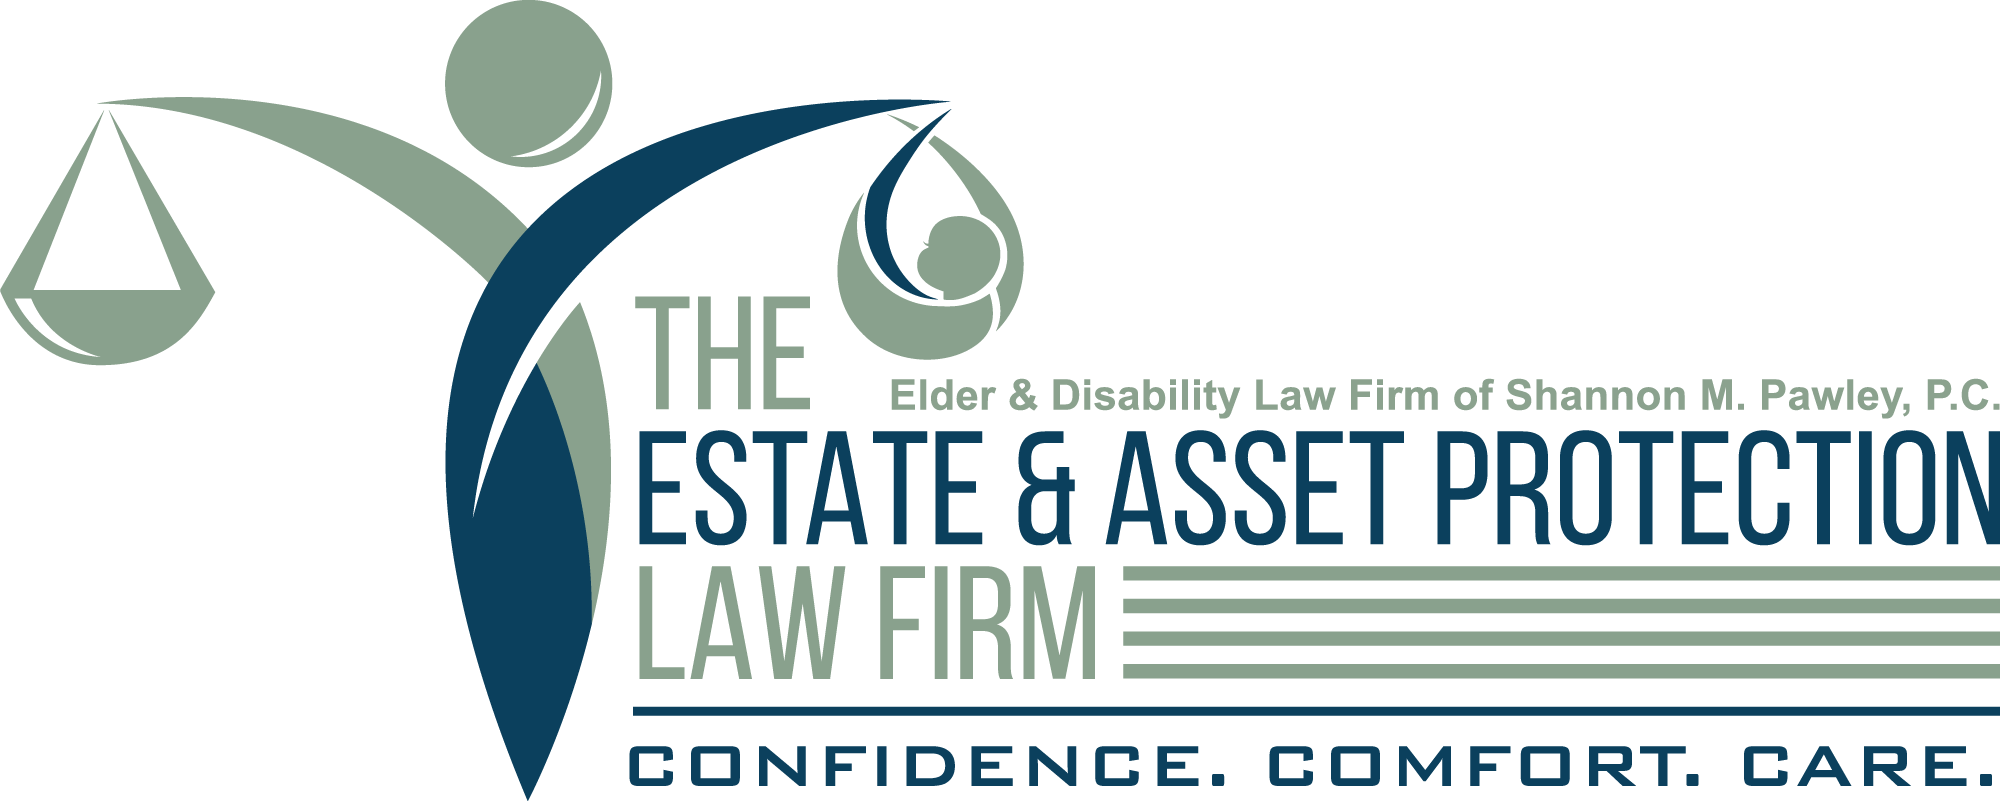 Image of wills and estates unmarried life partners estate planning asset protection  on estate management asset protection law site